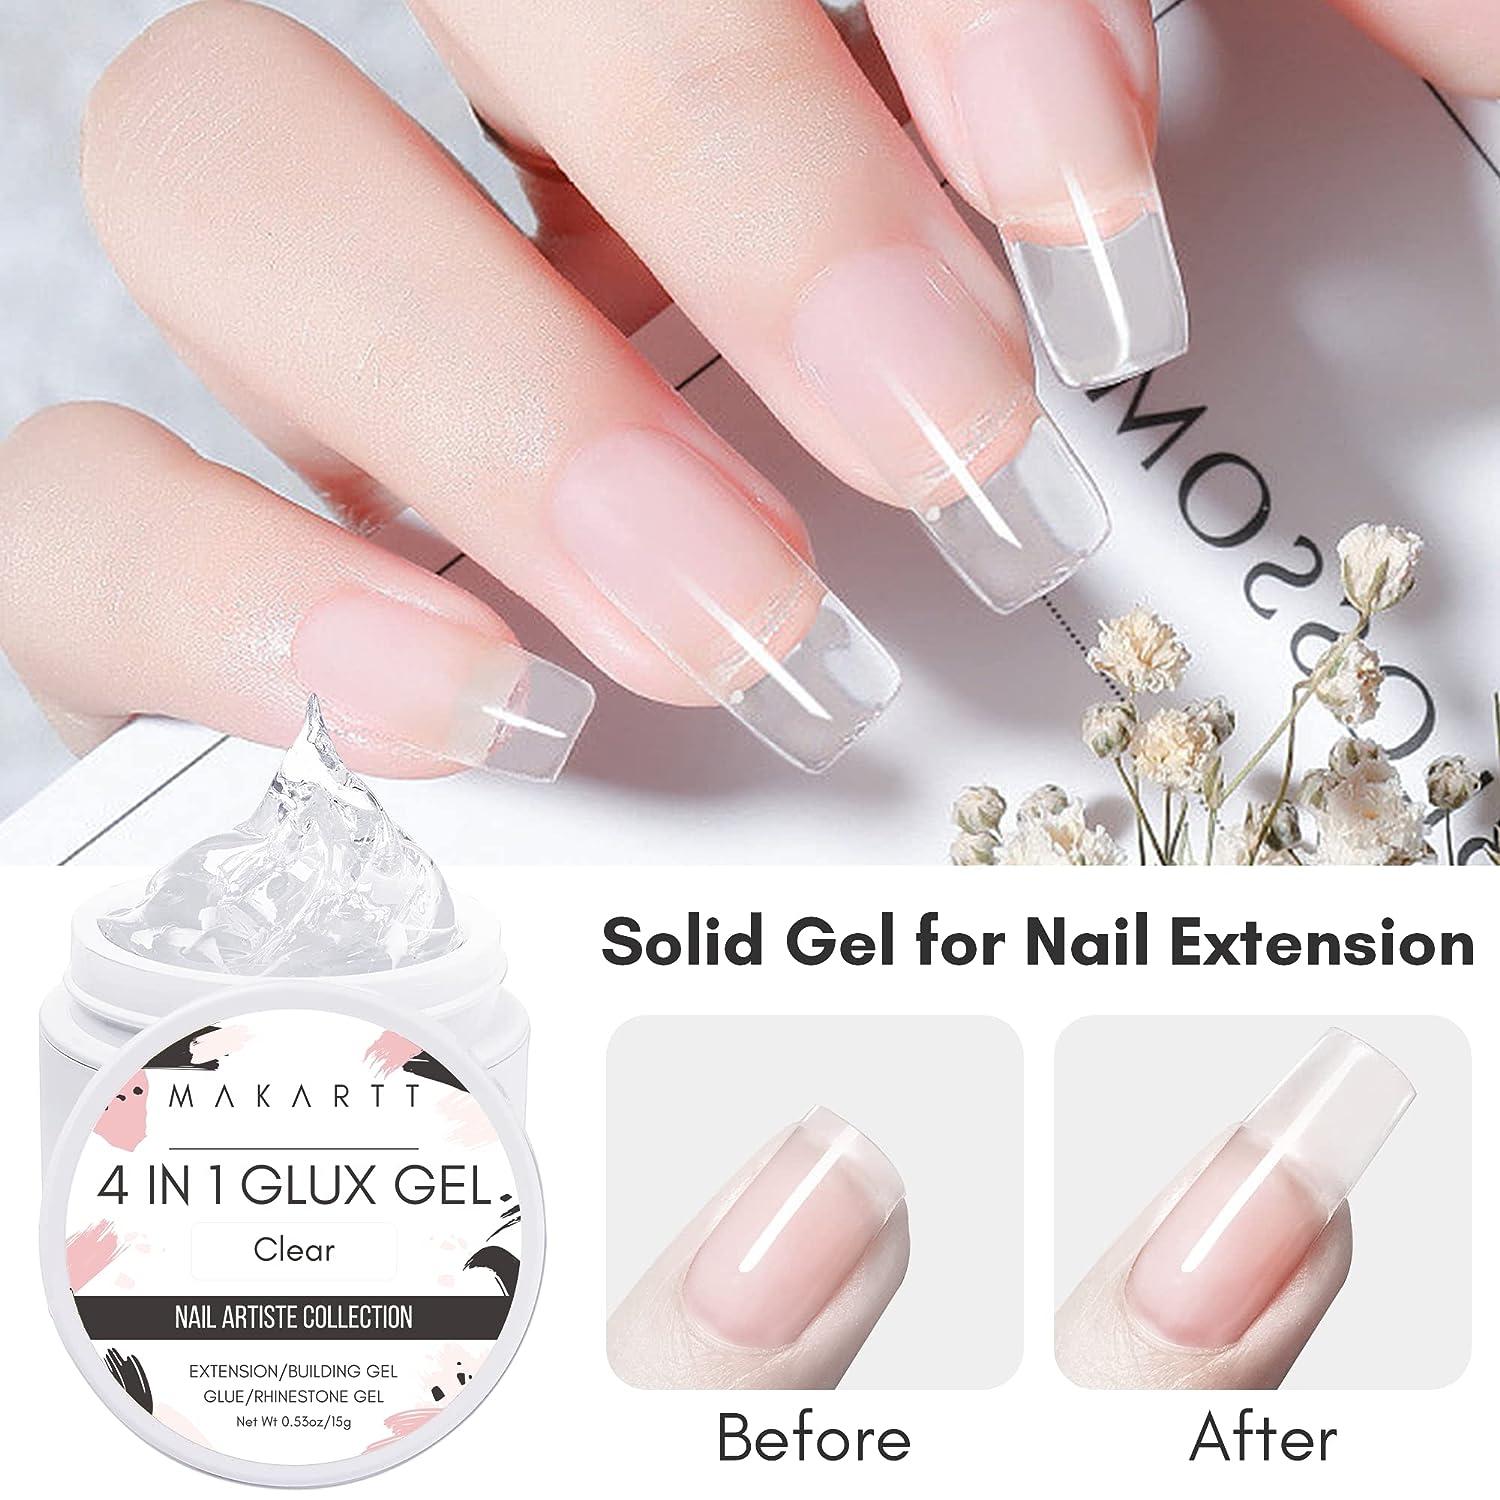 Makartt Pink Nail Rhinestones with Gel Nail Glue for Gems 15ML Strong